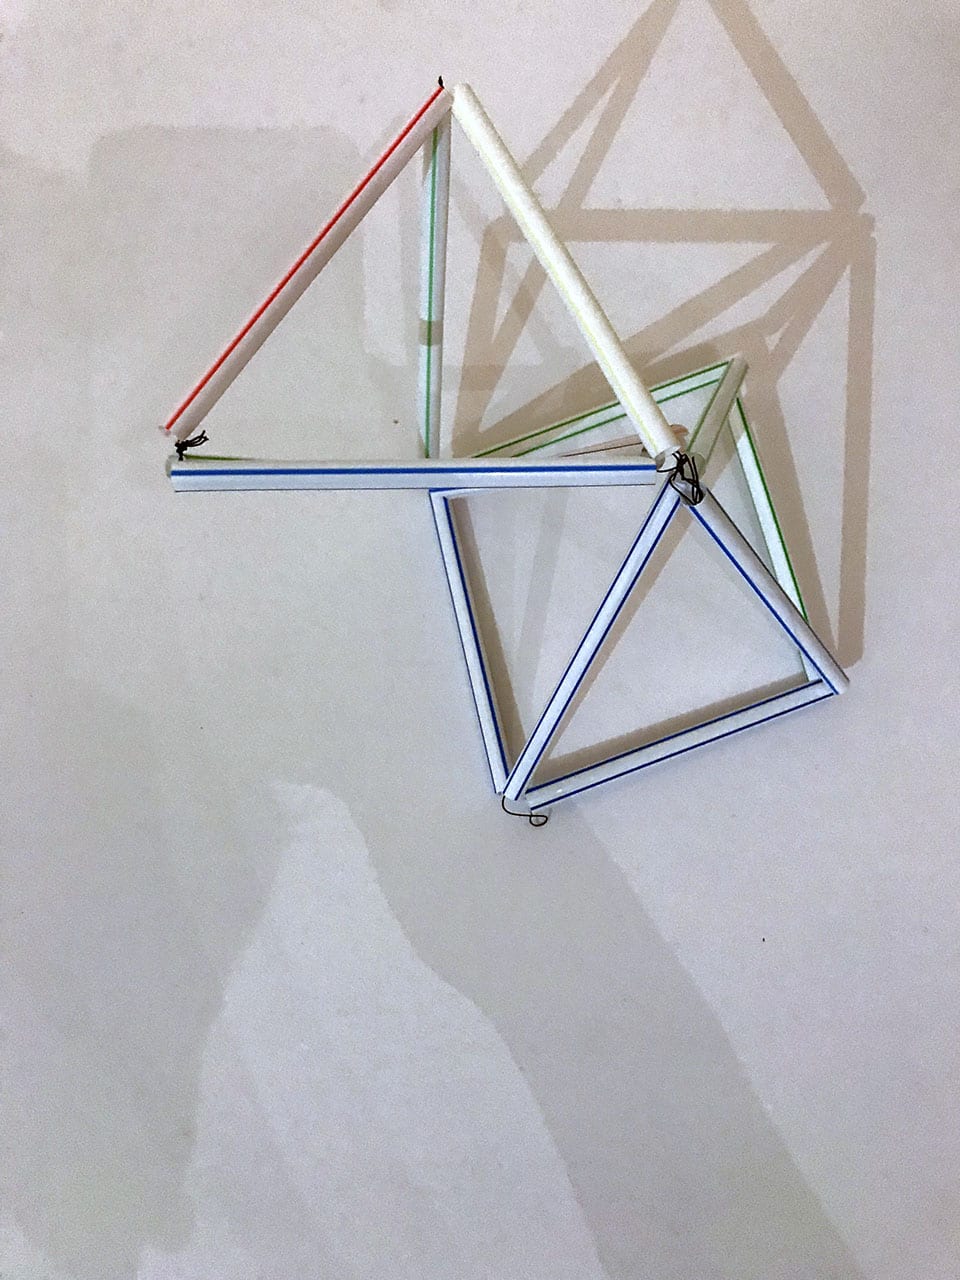 ASSIGNMENT #6 Straws Polyhedrons